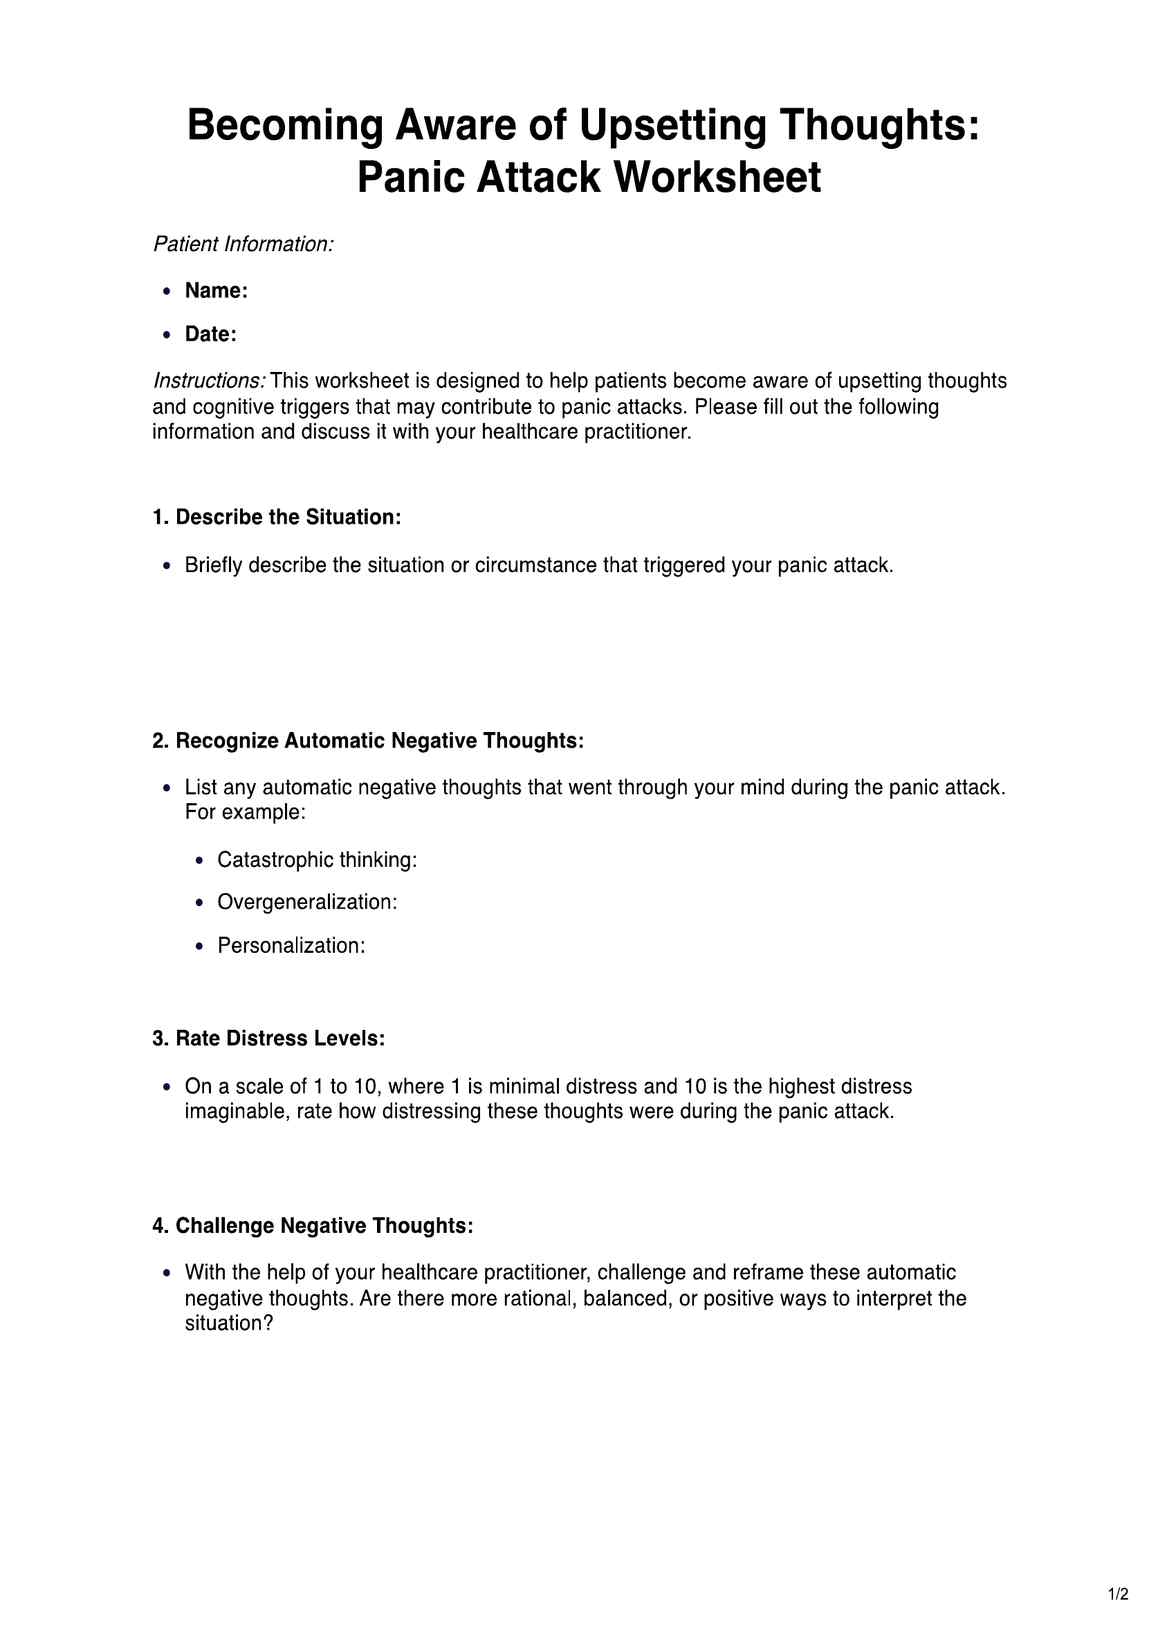 Becoming Aware of Upsetting Thoughts Panic Attack Worksheet PDF Example